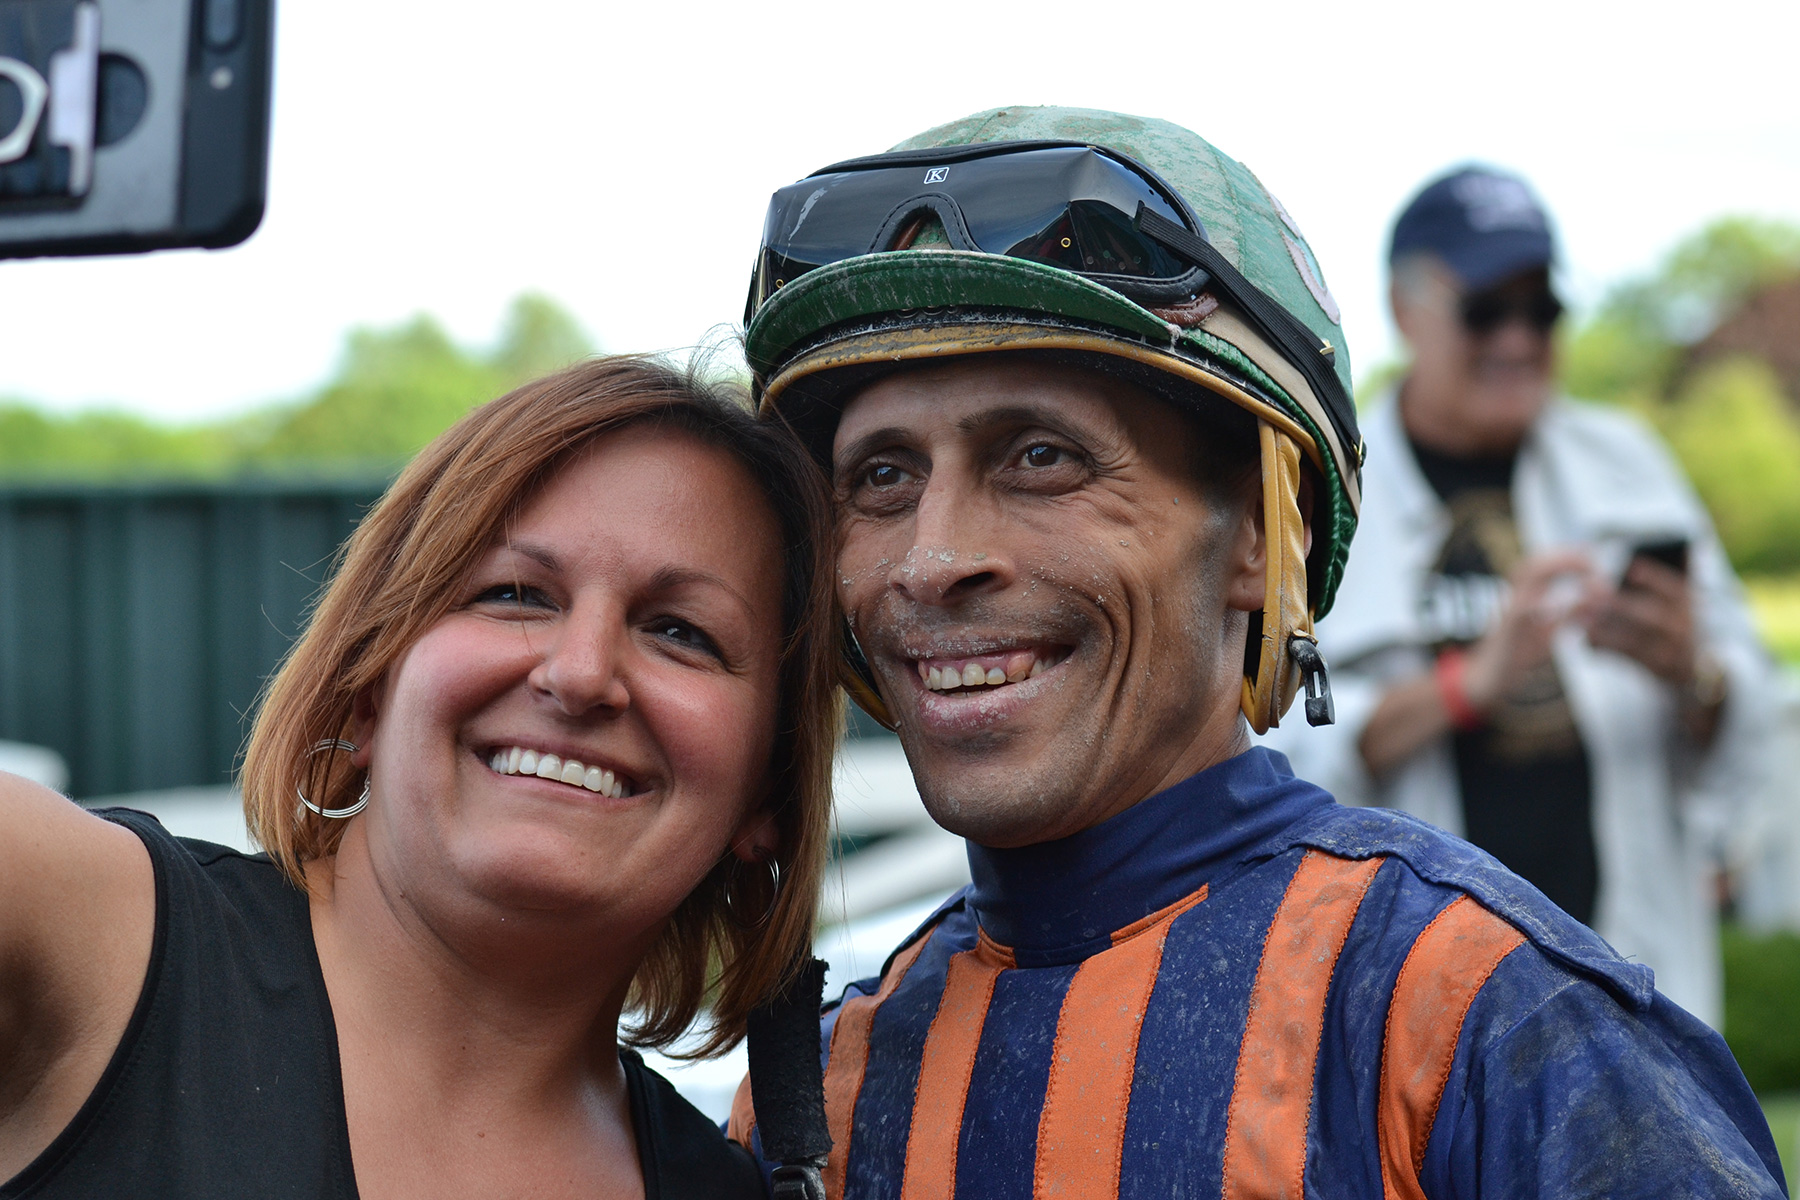 Andy Hernandez Sanchez takes selfies with well-wishers after he wins the last race at Suffolk Downs